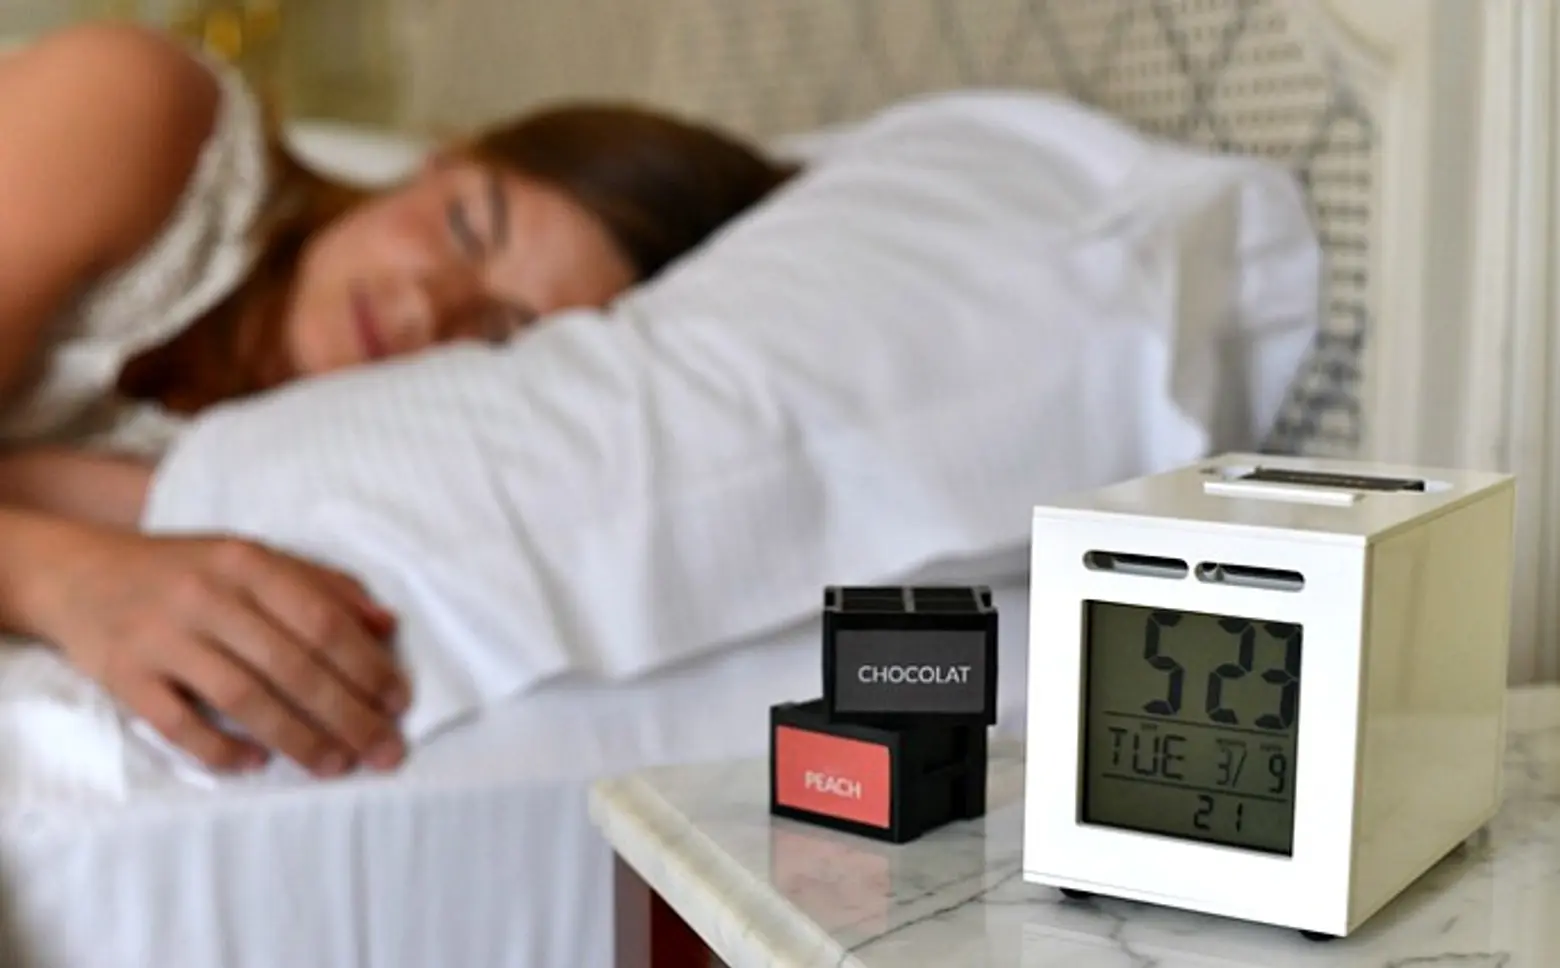 Wake Up to the Smell of a Hot Croissant or Cut Grass with This Olfactory Alarm Clock